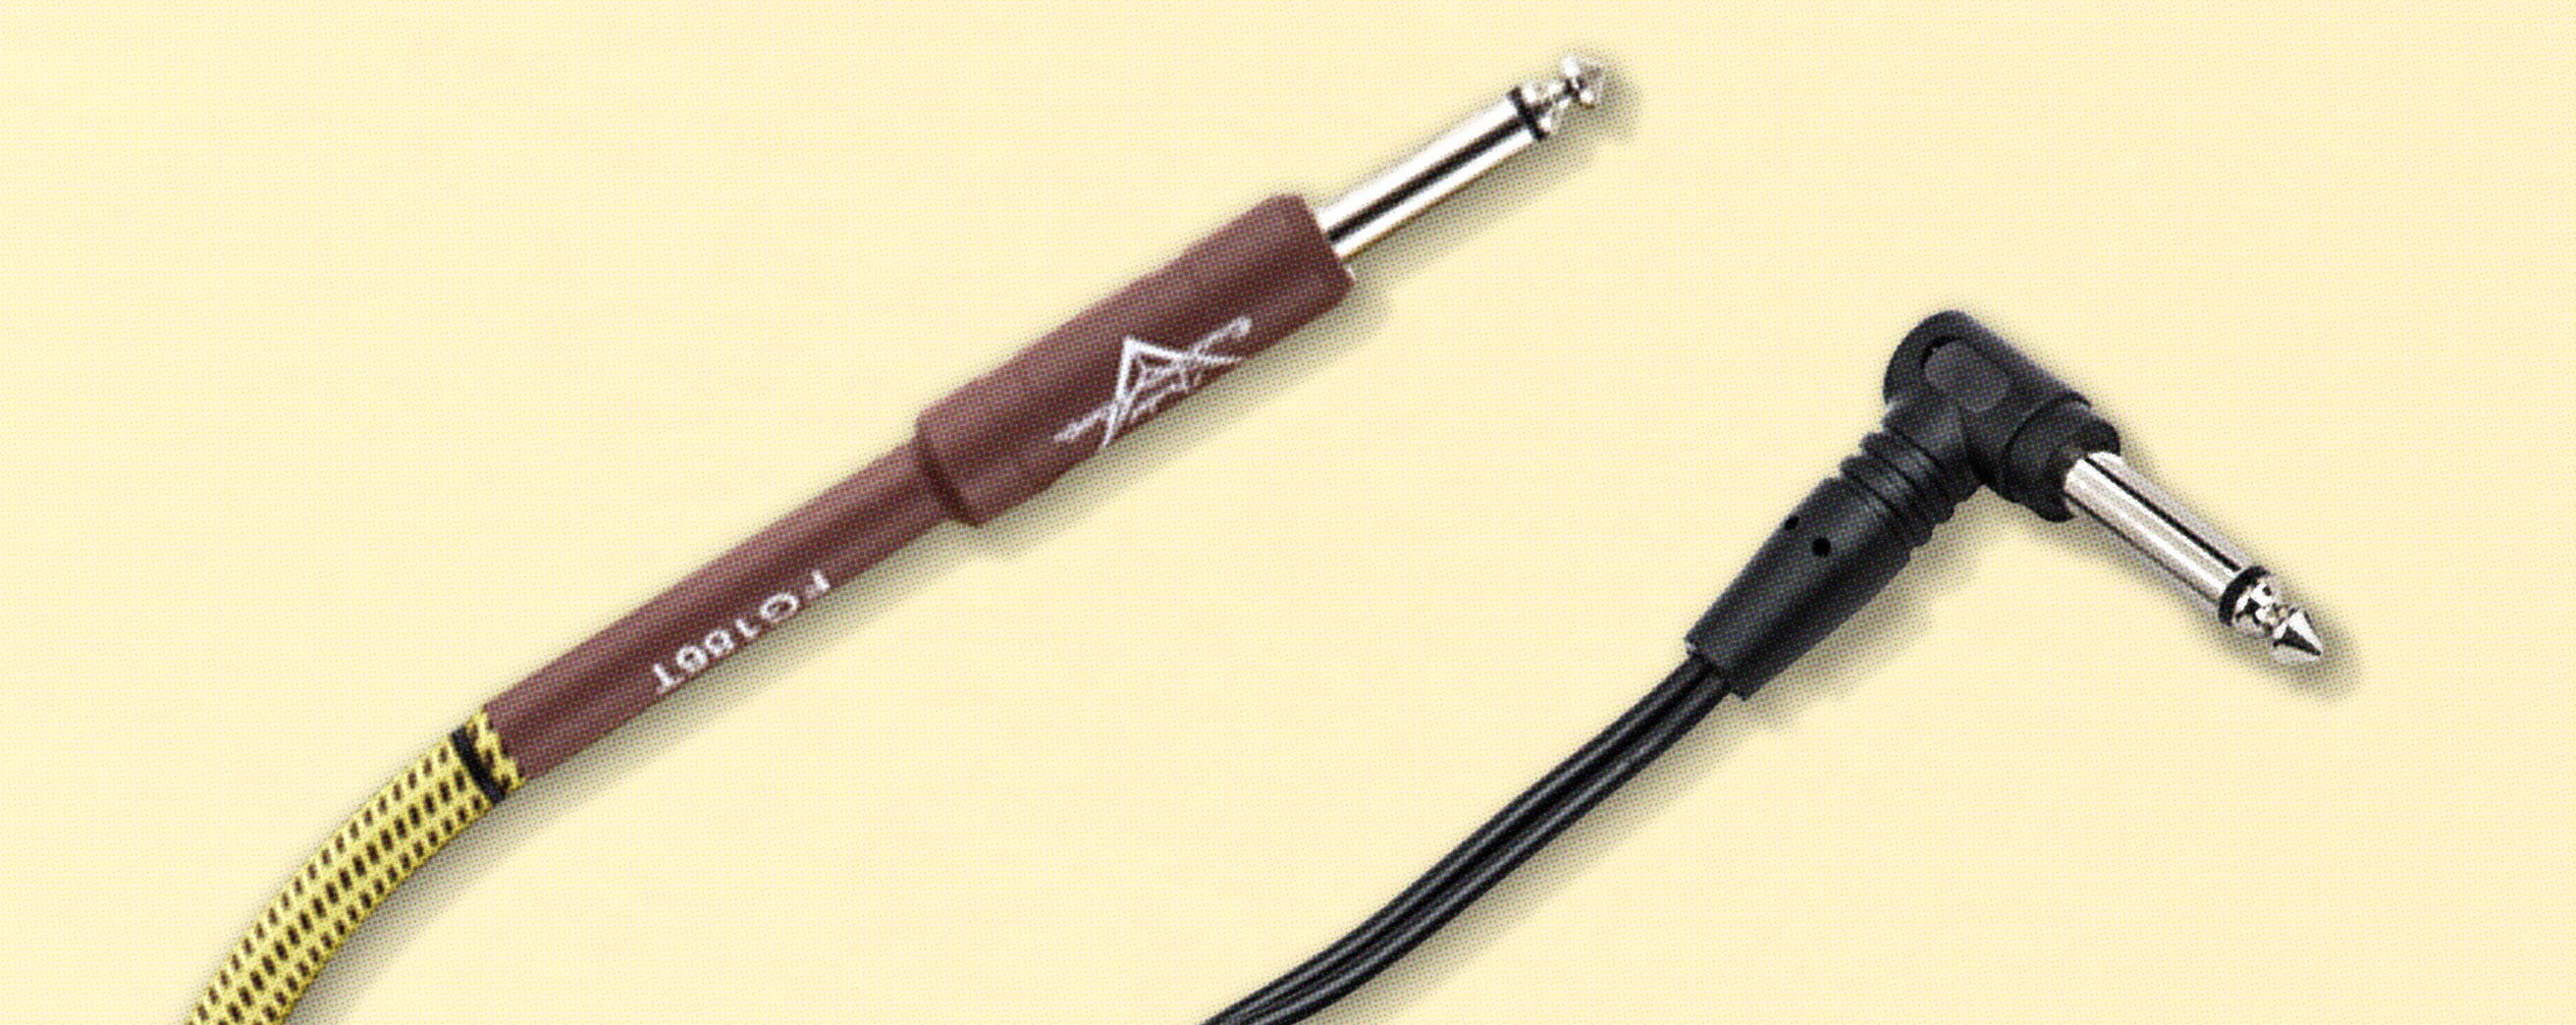 Speaker vs. Instrument Cables  Why Instrument Cables Aren't